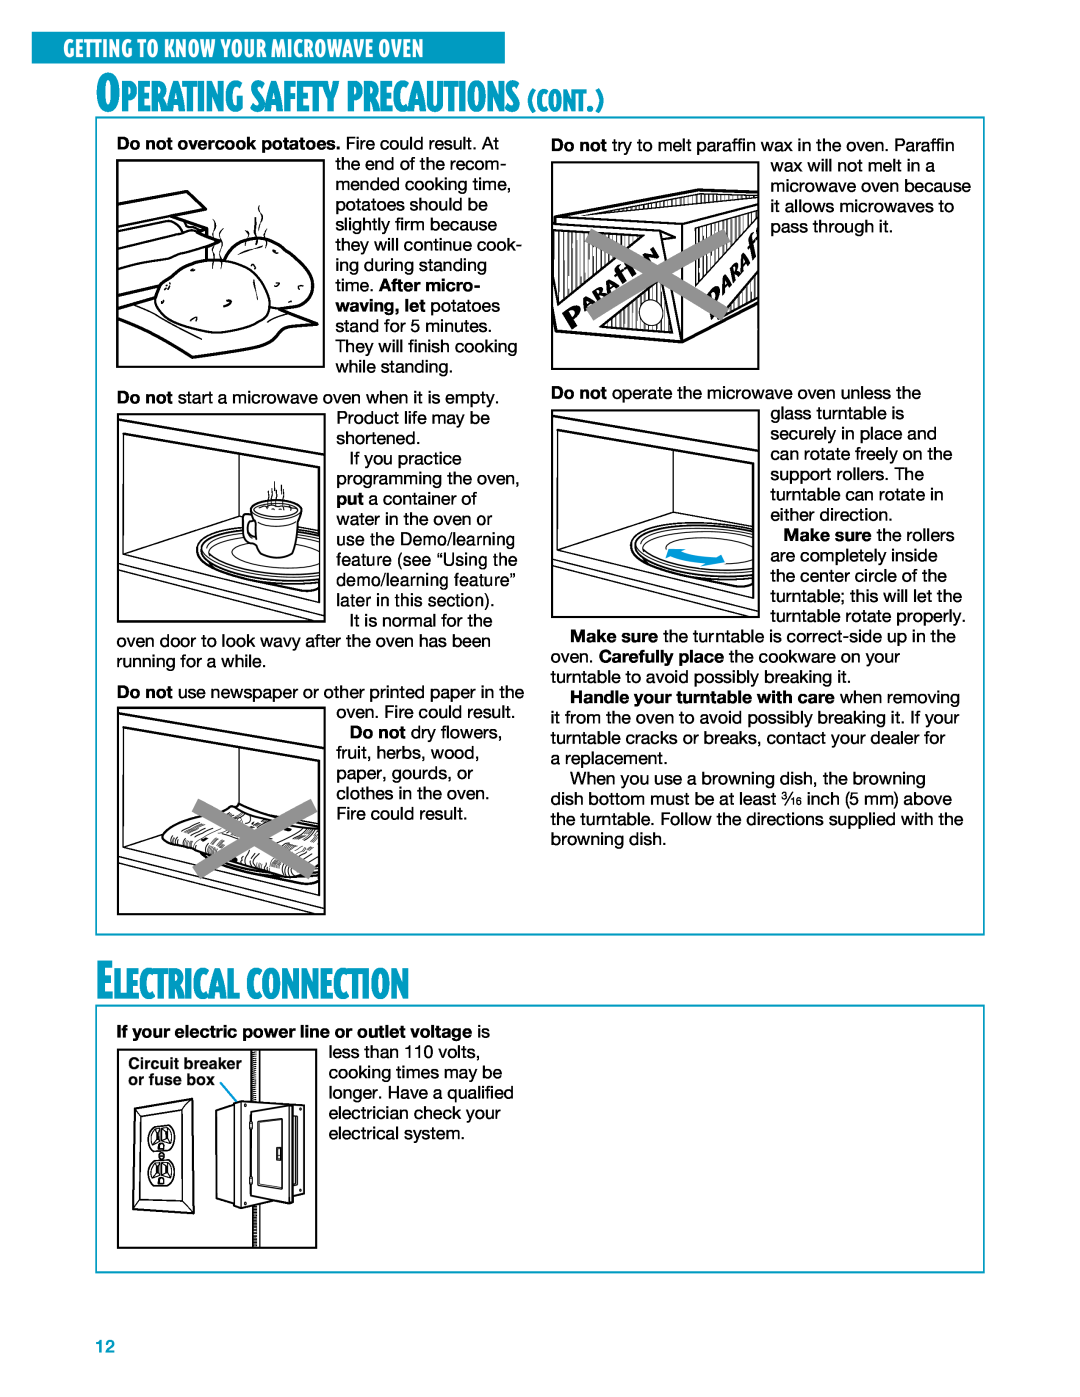 Whirlpool YMH7140XF Electrical Connection, Operating Safety Precautions Cont, time. After micro 